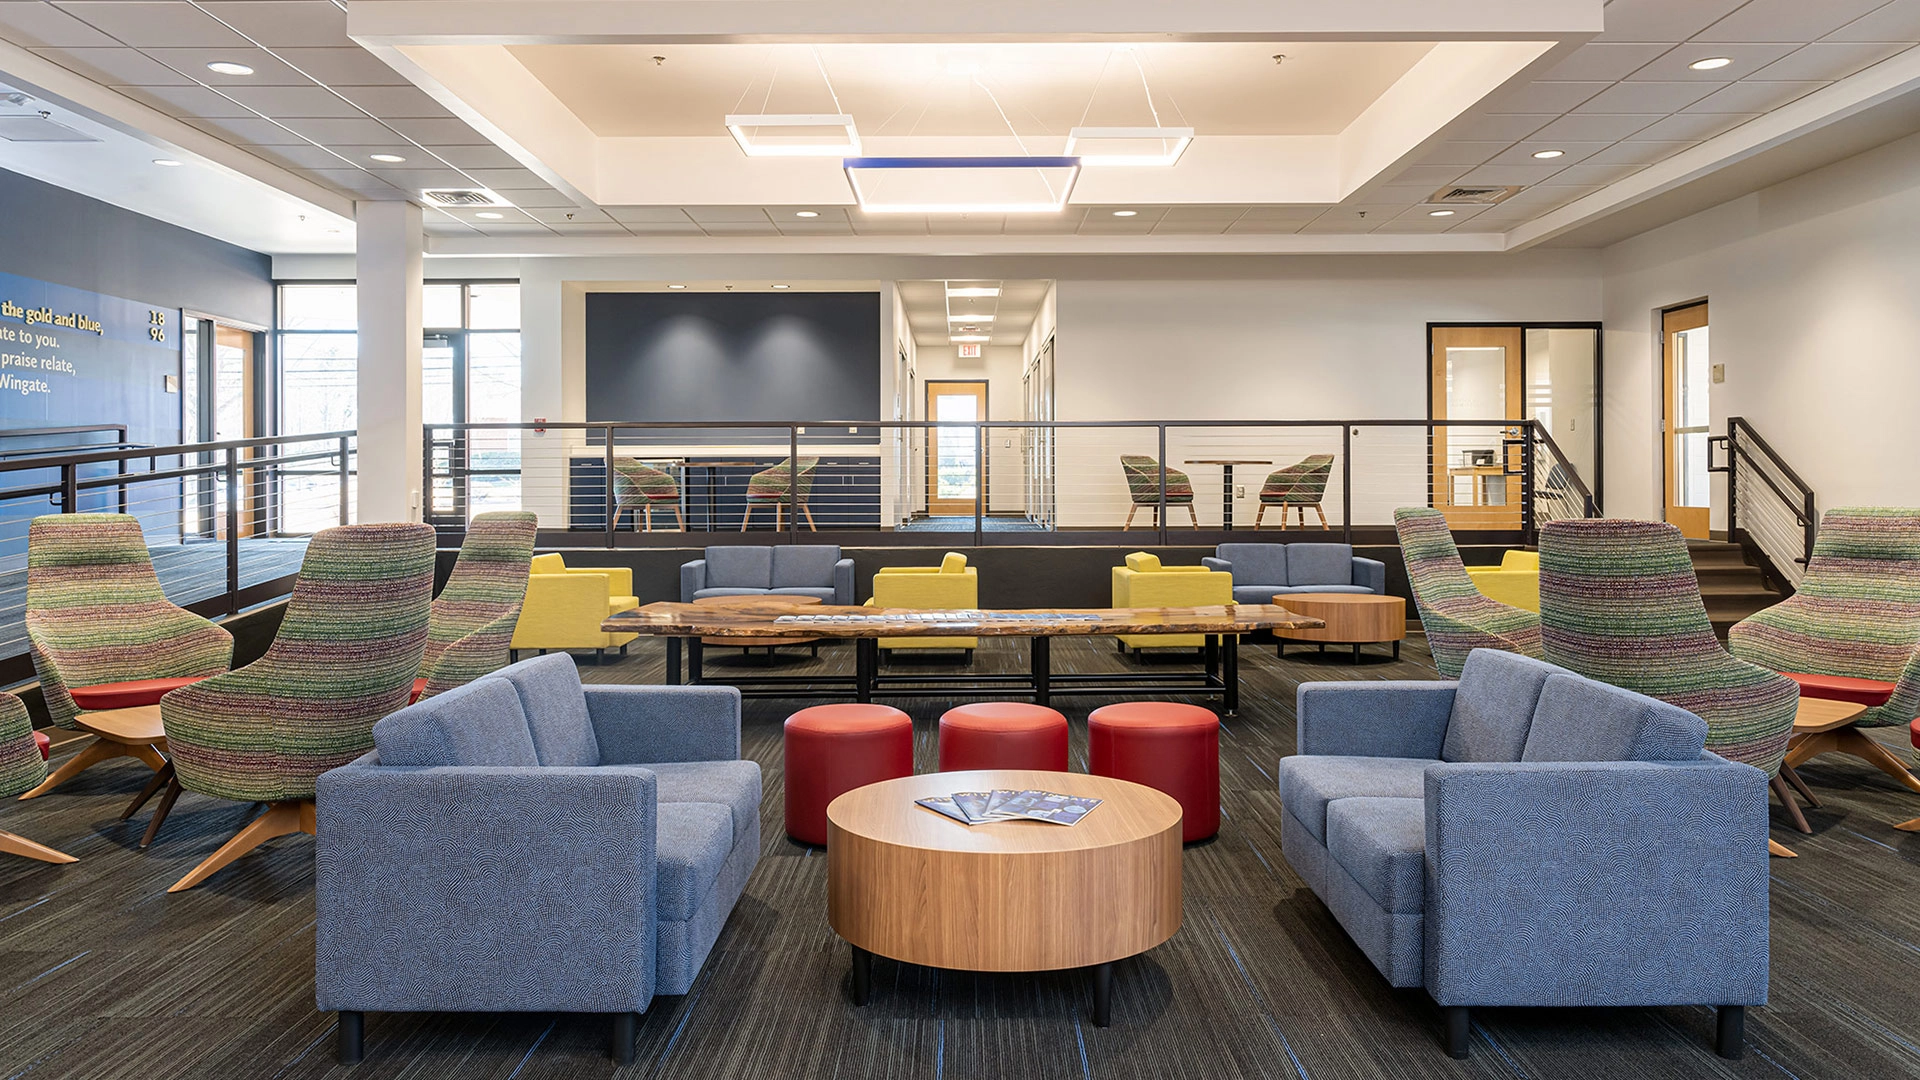 Commercial Interior Design for a student and visitor welcome center at Wingate University